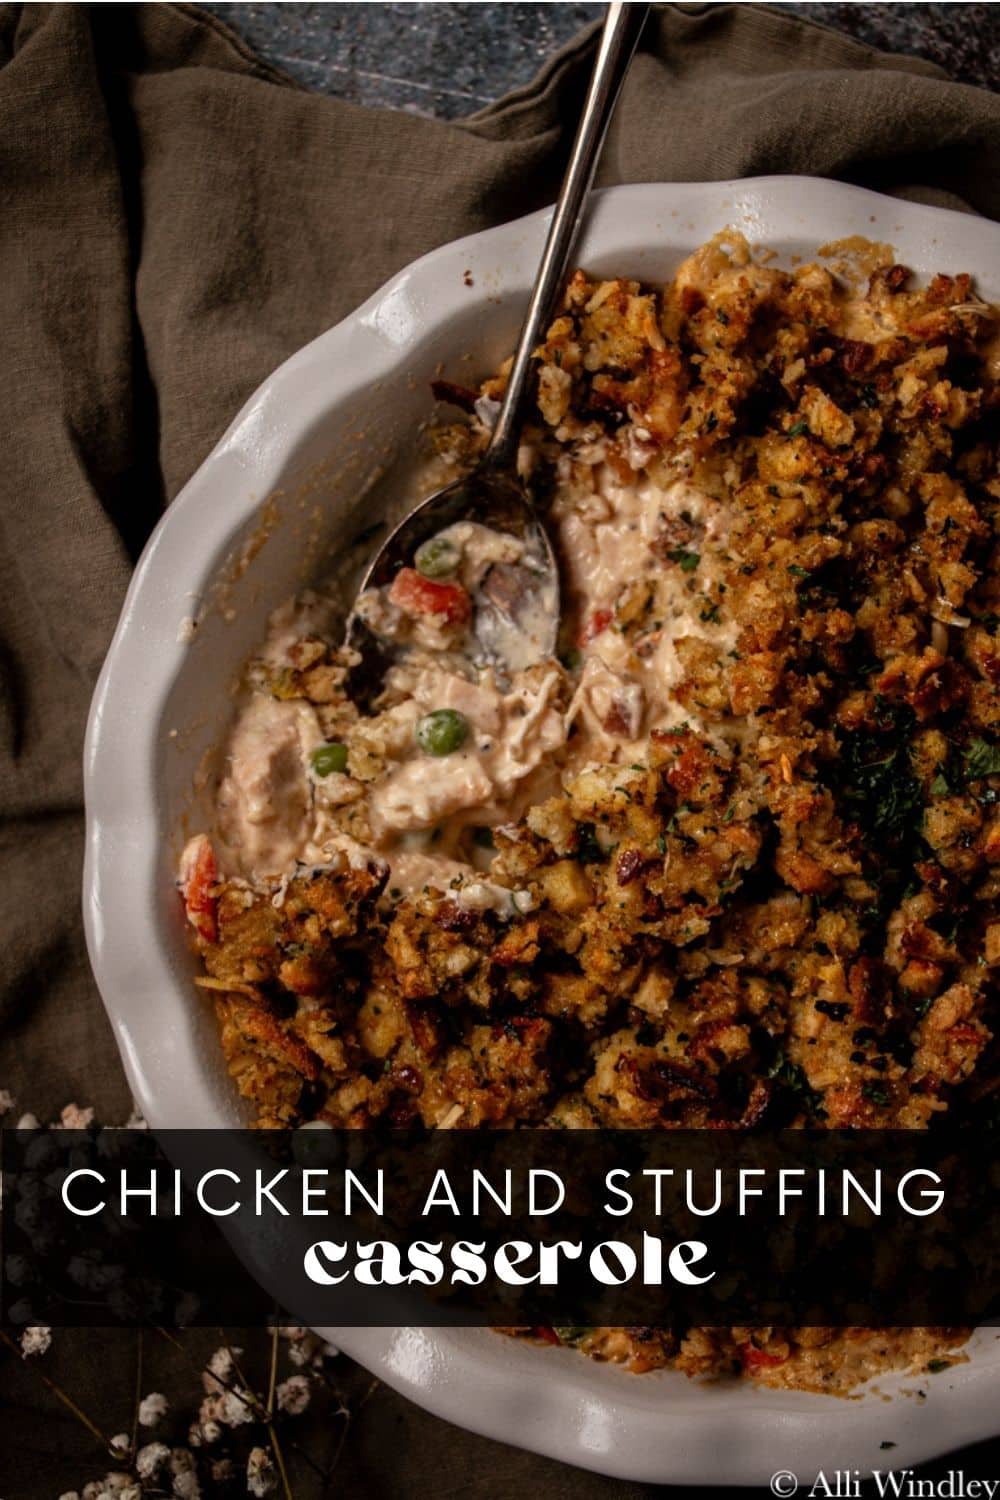 This one-pan chicken and stuffing bake is the perfect way to use up leftover rotisserie chicken! It's quick (thanks to boxed stuffing mix), easy, and uses pantry staples to reduce prep time. It's a family favorite that'll have everyone asking for seconds!